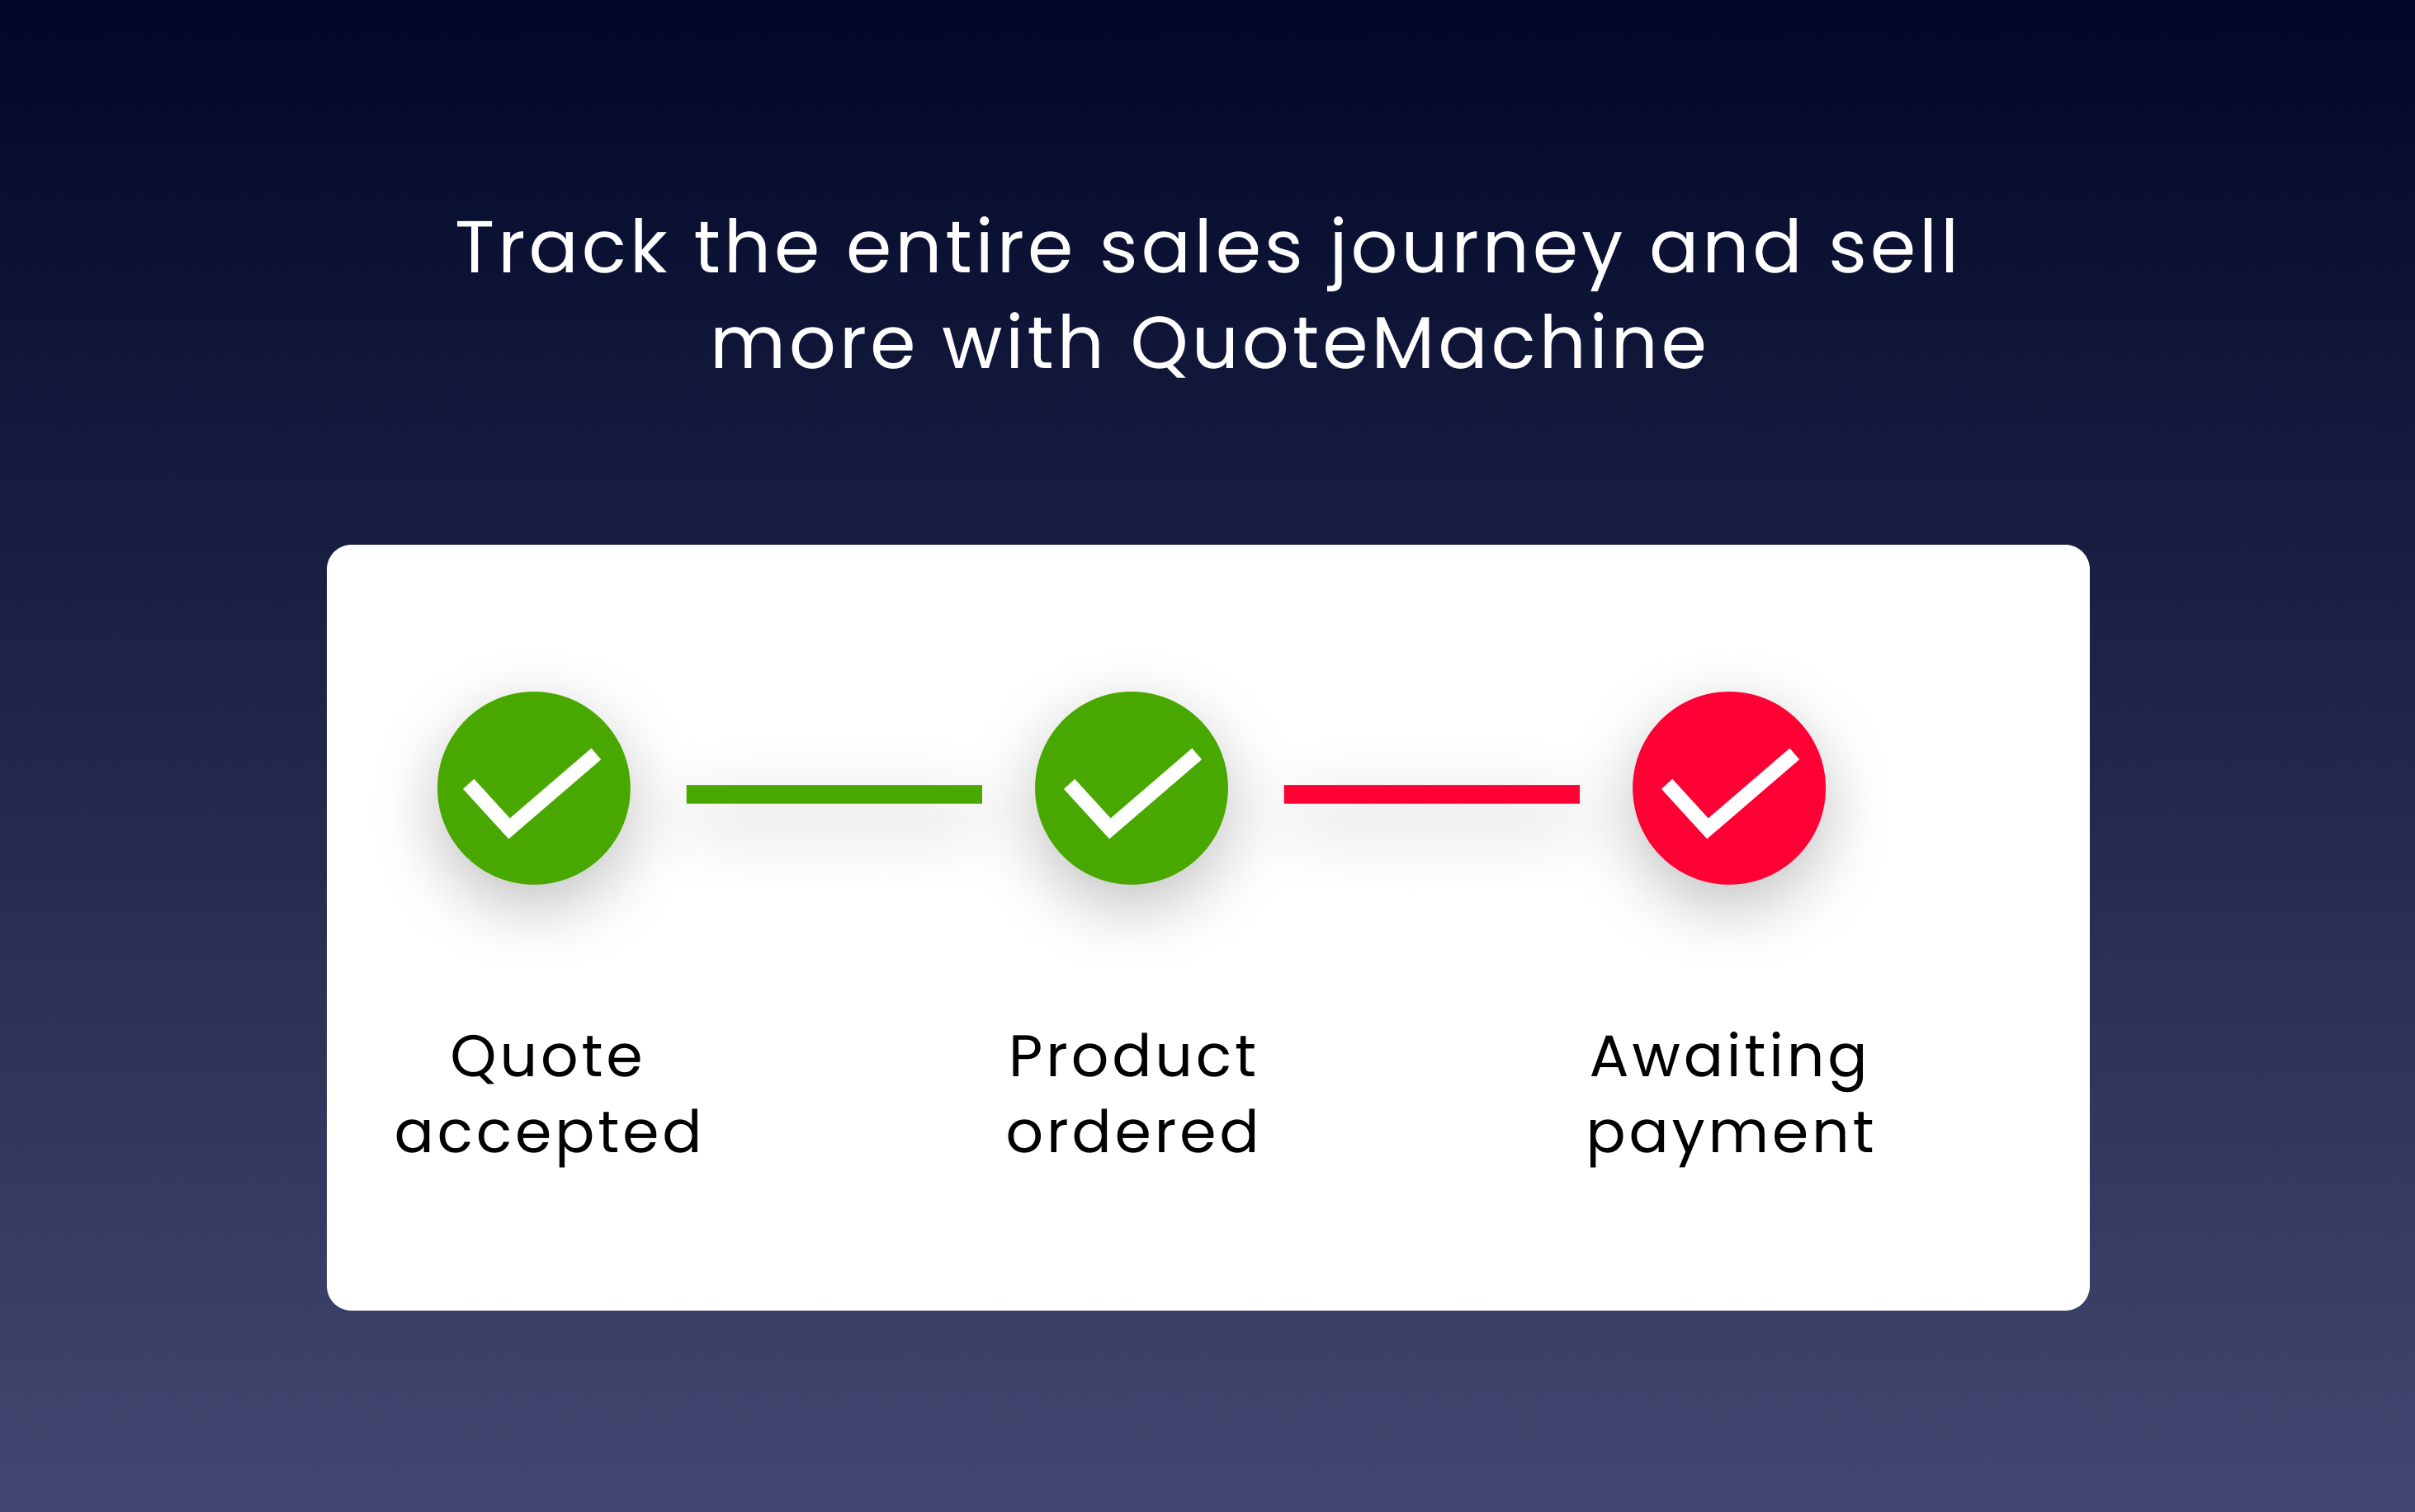 QuoteMachine ensures every part of the sales process is linked to effortlessly track the entire customer journey, including sales, payments, inventory, appointments, and more.